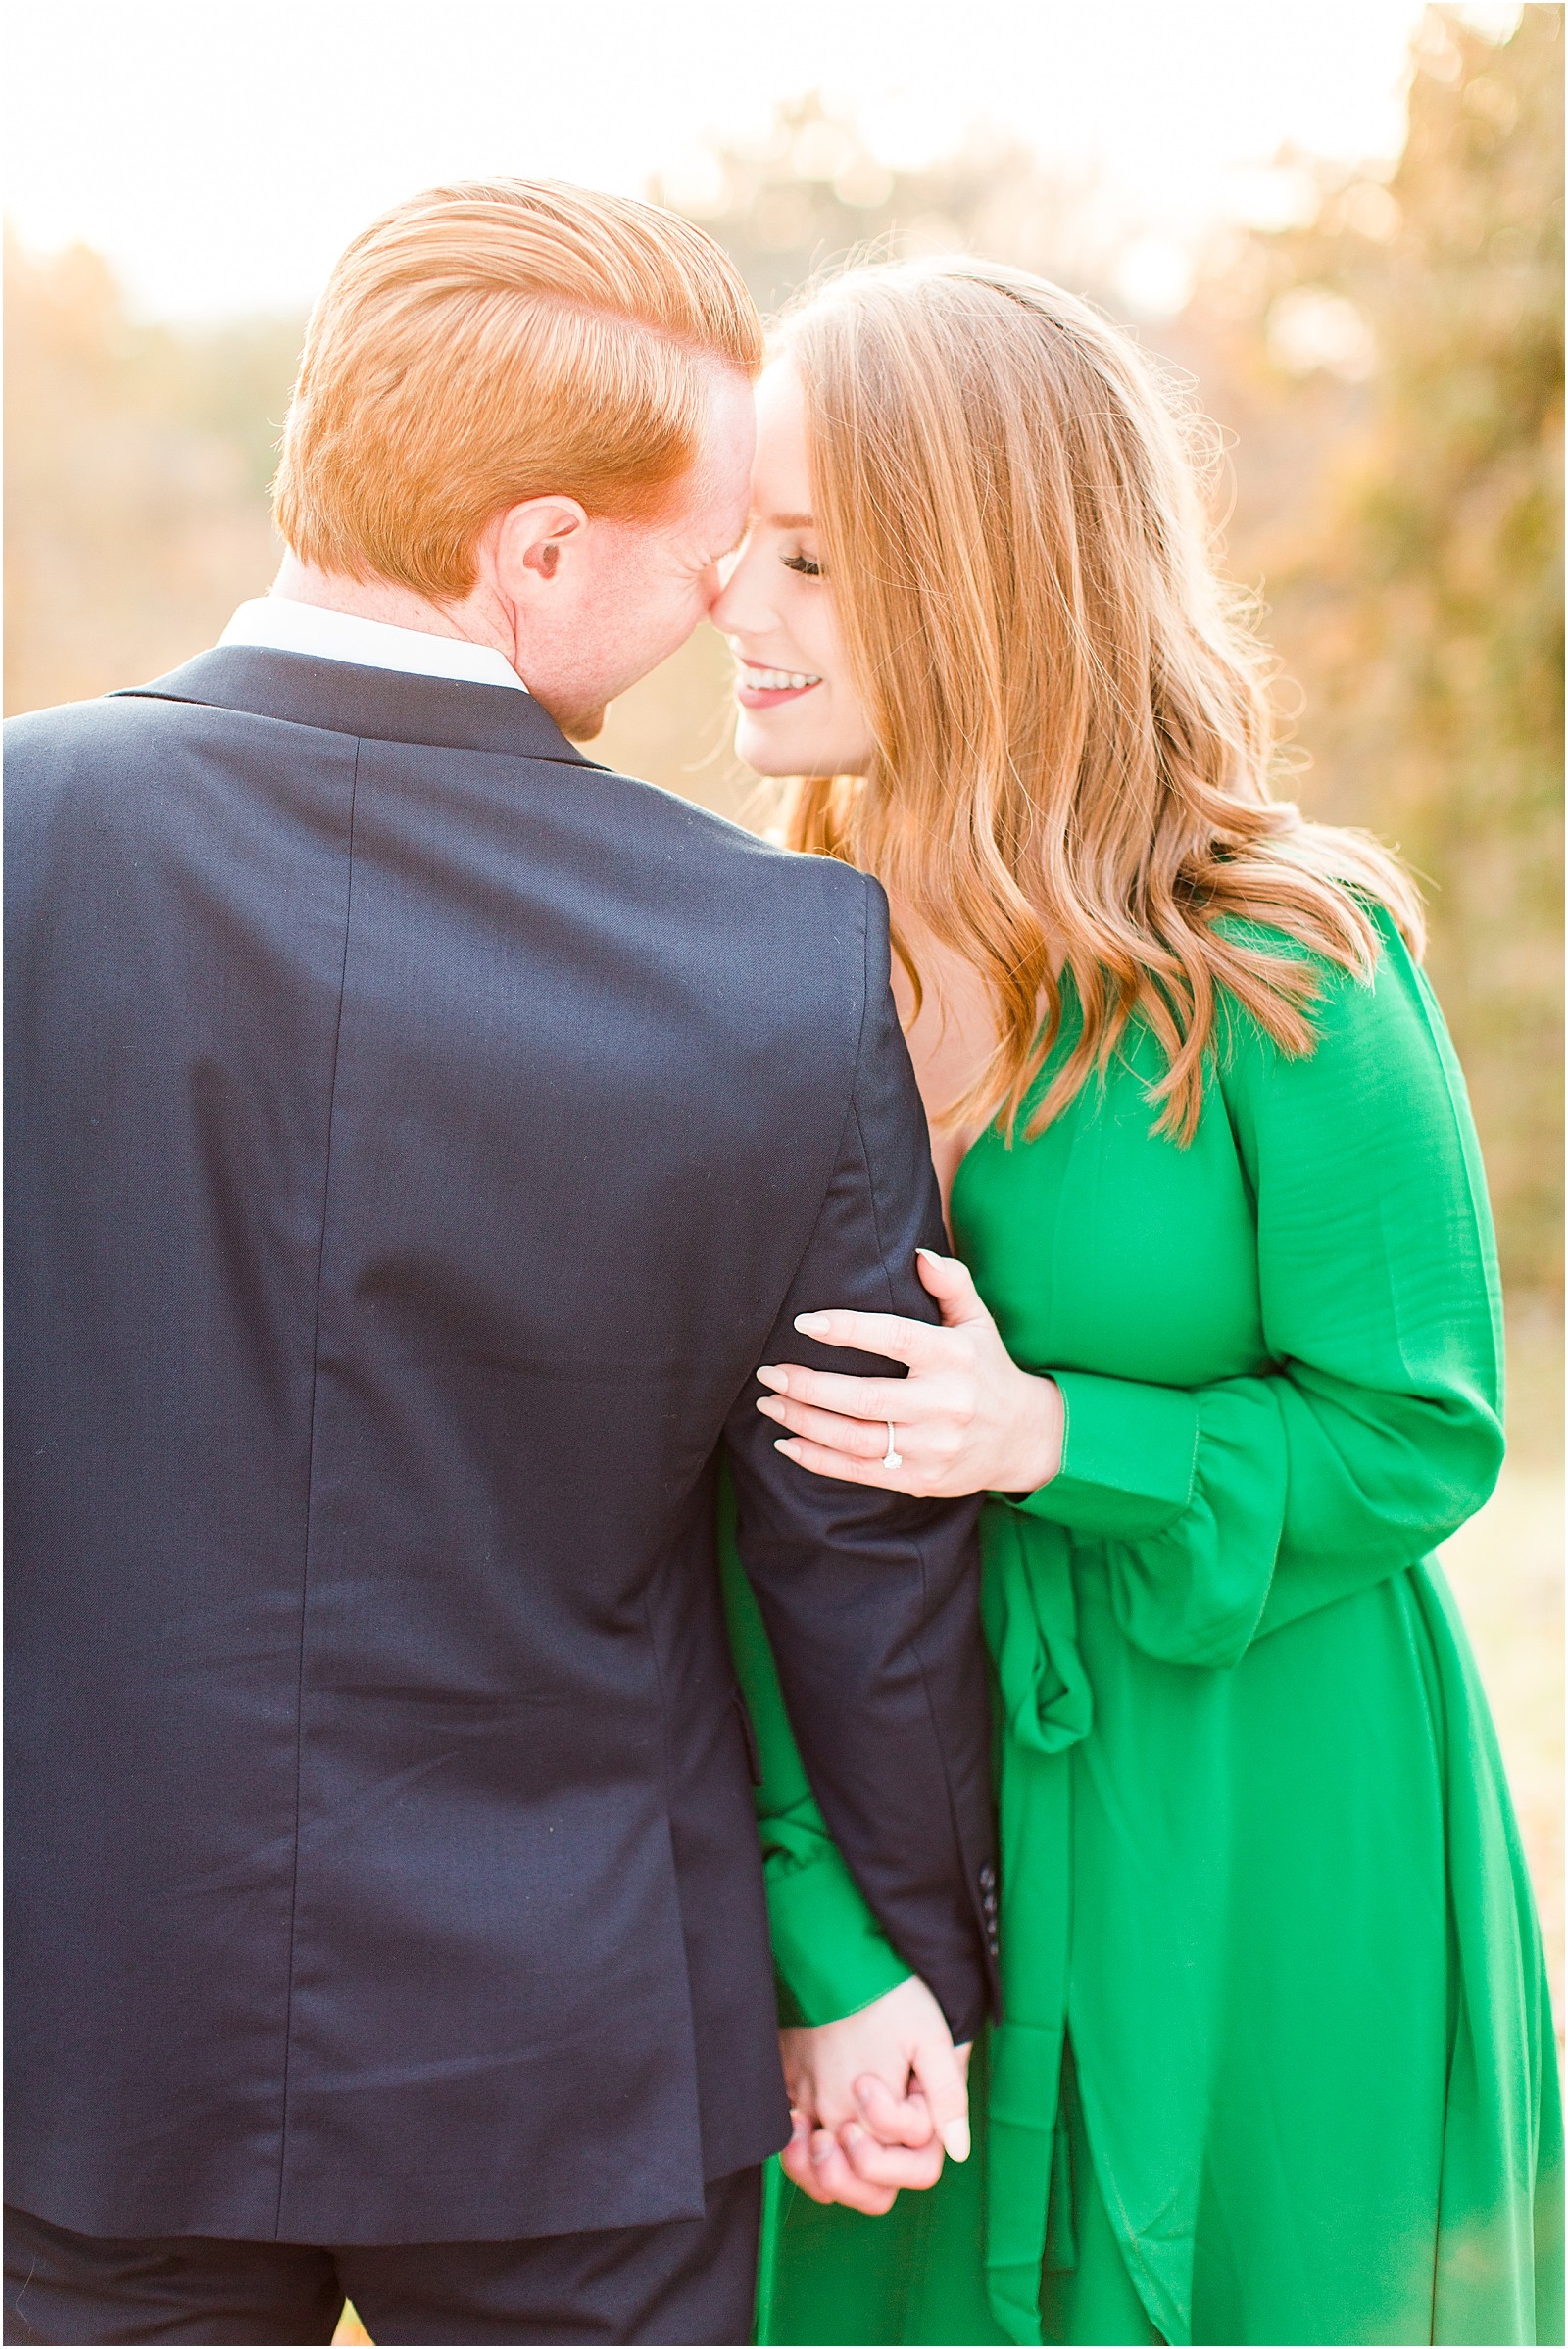 A Mesker Park Zoo Engagement Session | Jennah and Steve | Bret and Brandie Photography025.jpg